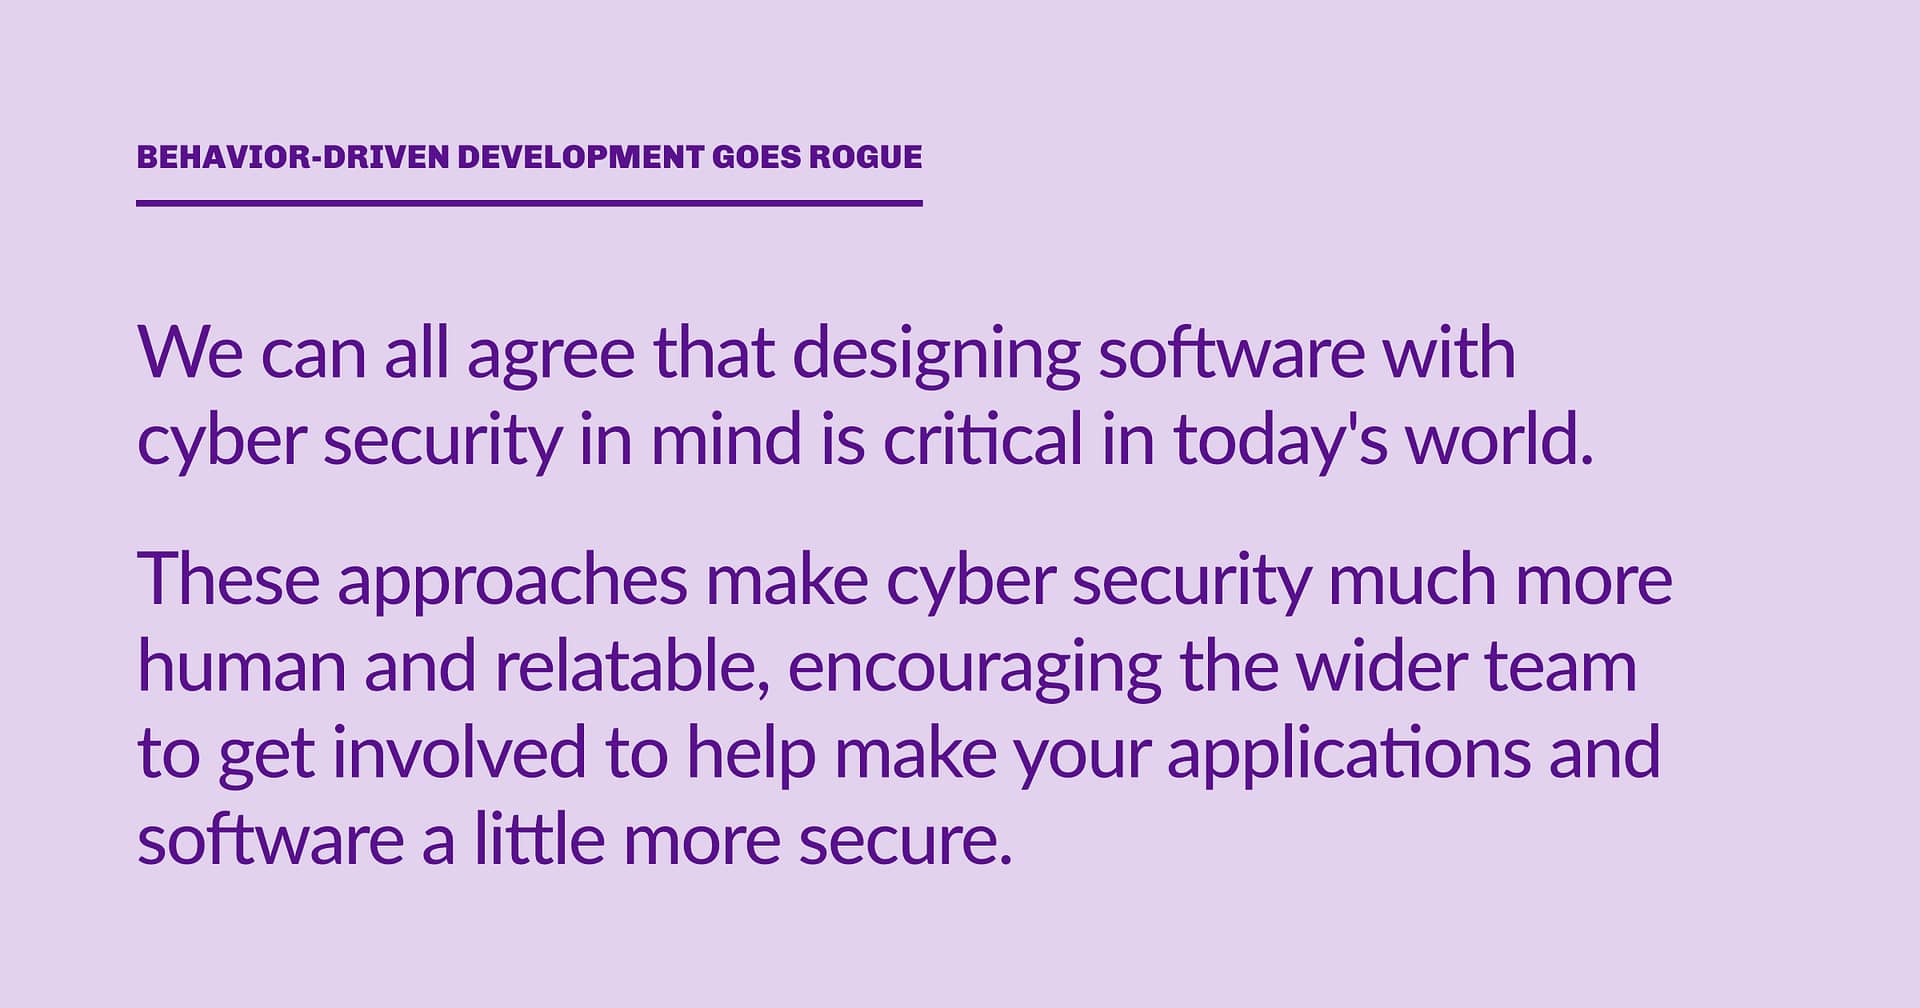 Highlight block: We can all agree that designing software with cyber security in mind is critical in today's world. These approaches make cyber security much more human and relatable, encouraging the wider team to get involved to help make your applications and software a little more secure.